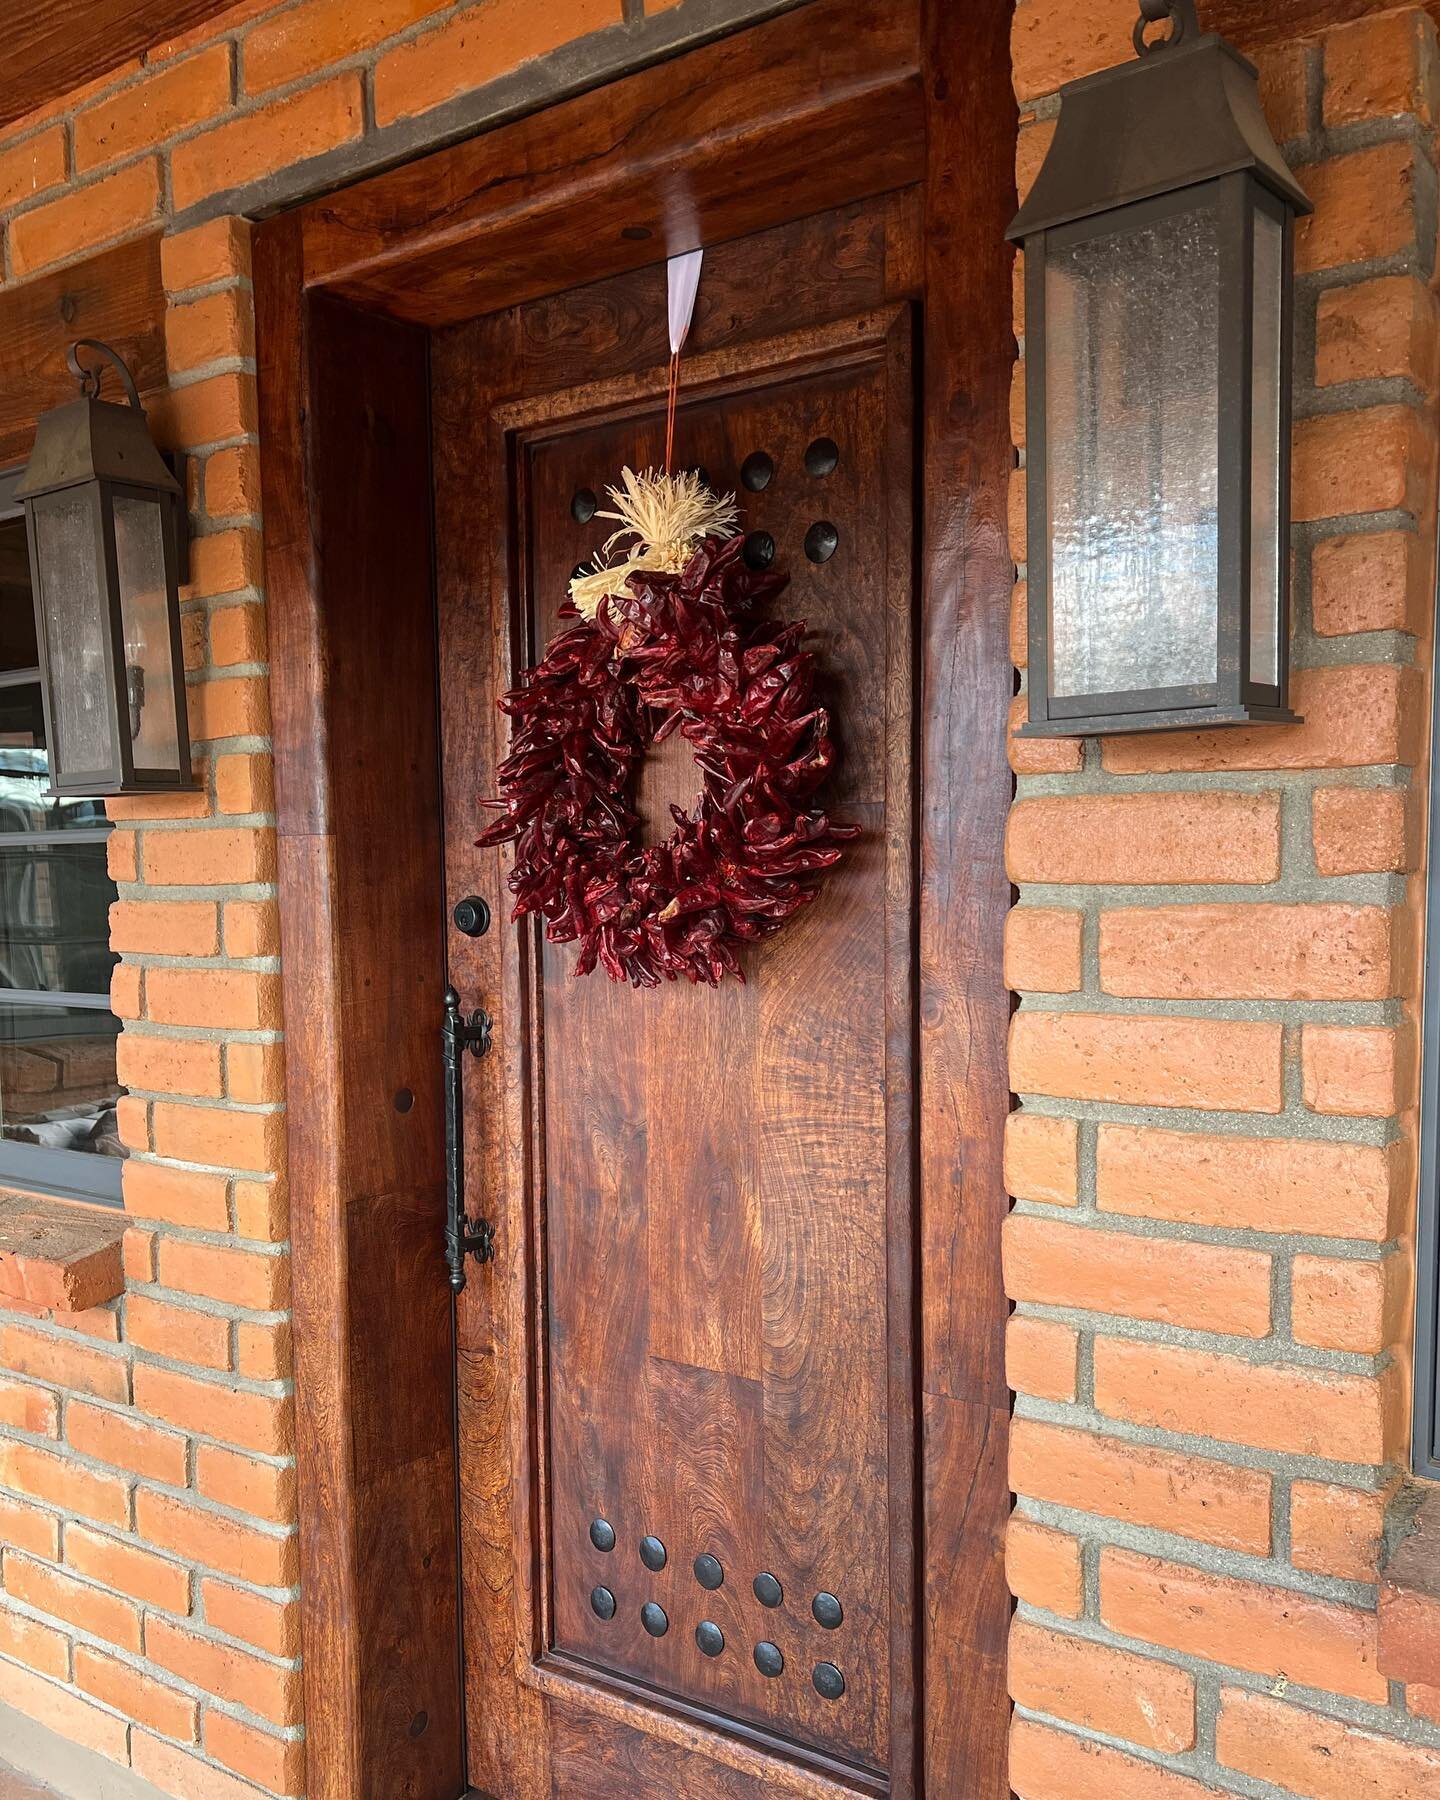 This charming home also has a beautiful story! More to come
#family #southwesternstyle #wooddoors #door #modernadobe #authentichome #hacienda #lifestyle